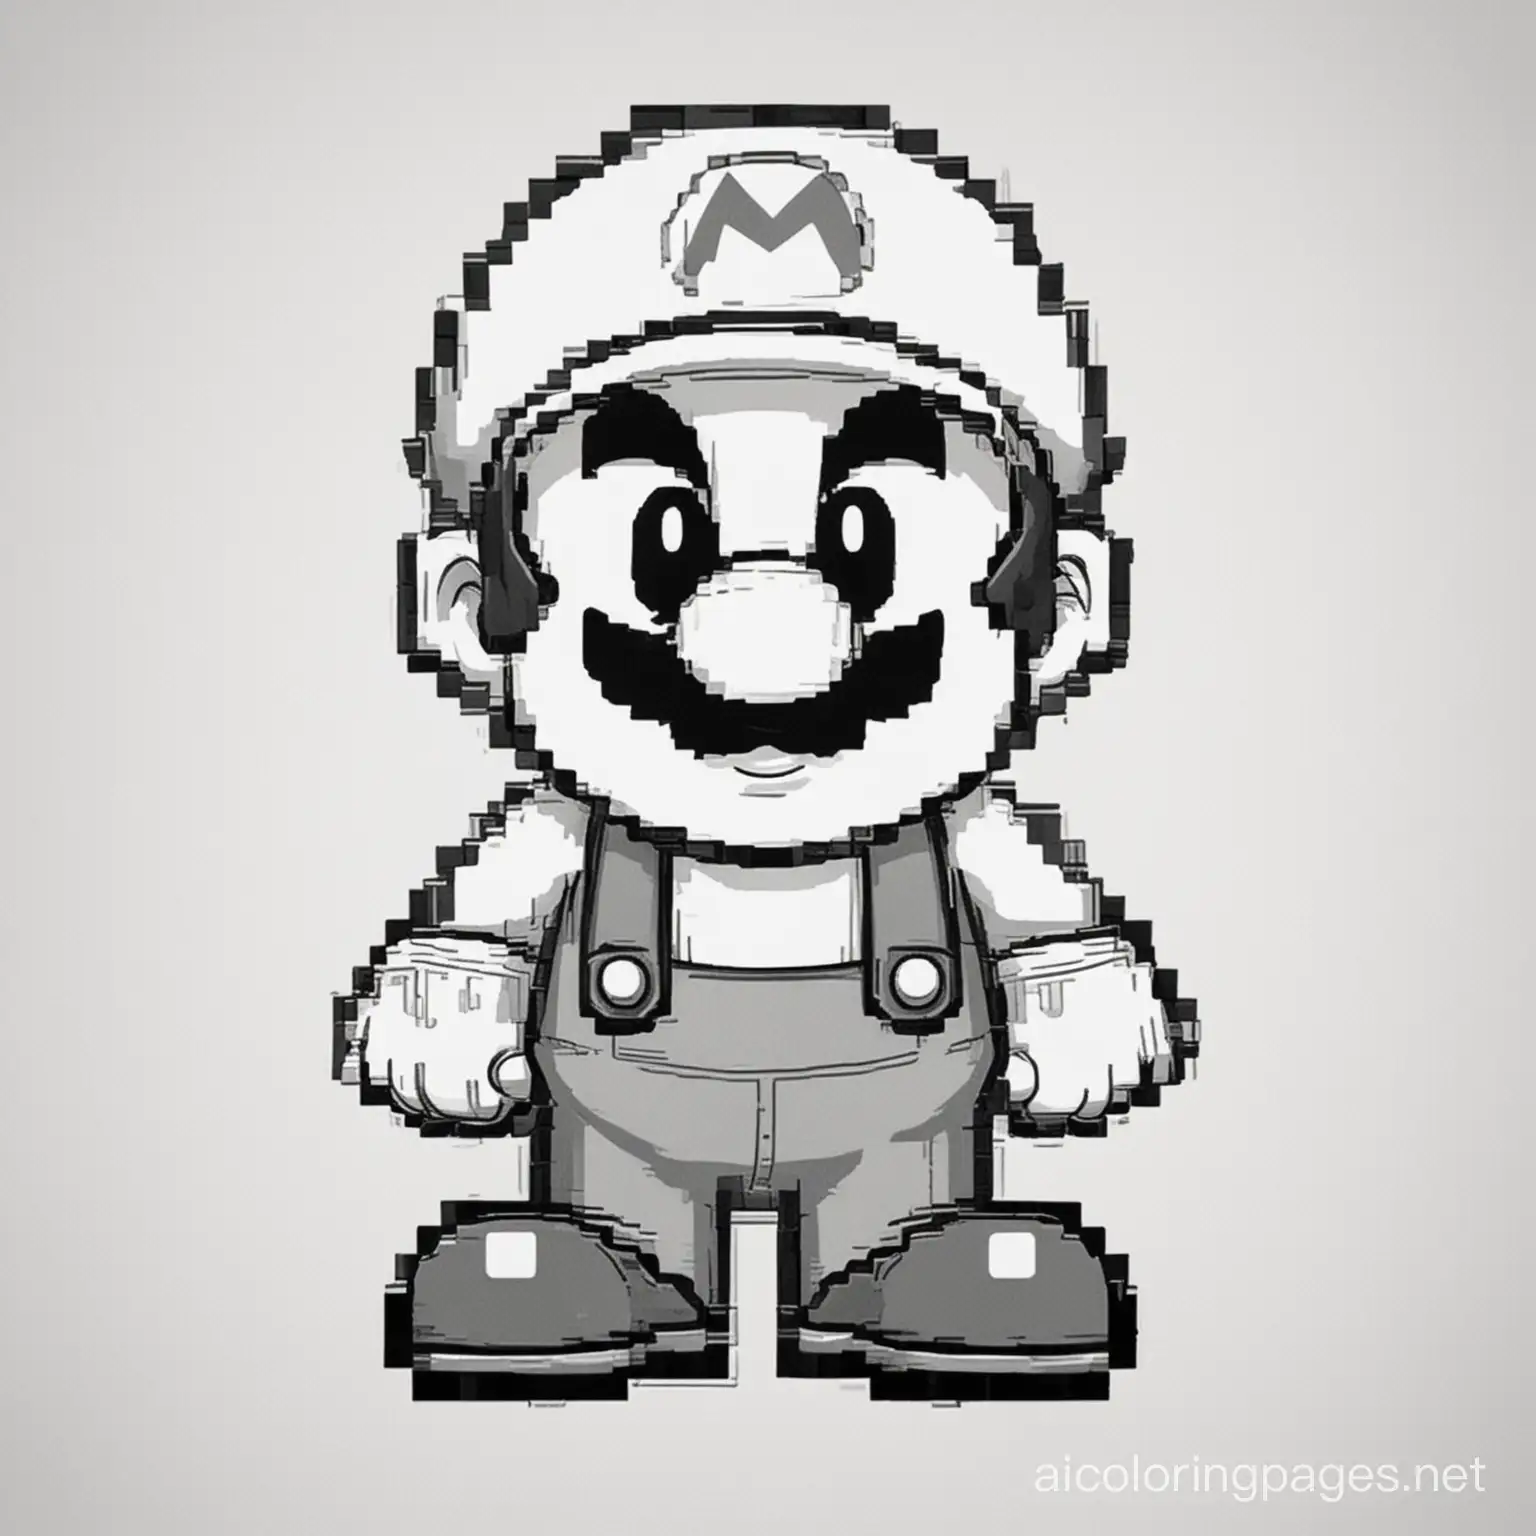 8bit mario, Coloring Page, black and white, line art, white background, Simplicity, Ample White Space. The background of the coloring page is plain white to make it easy for young children to color within the lines. The outlines of all the subjects are easy to distinguish, making it simple for kids to color without too much difficulty